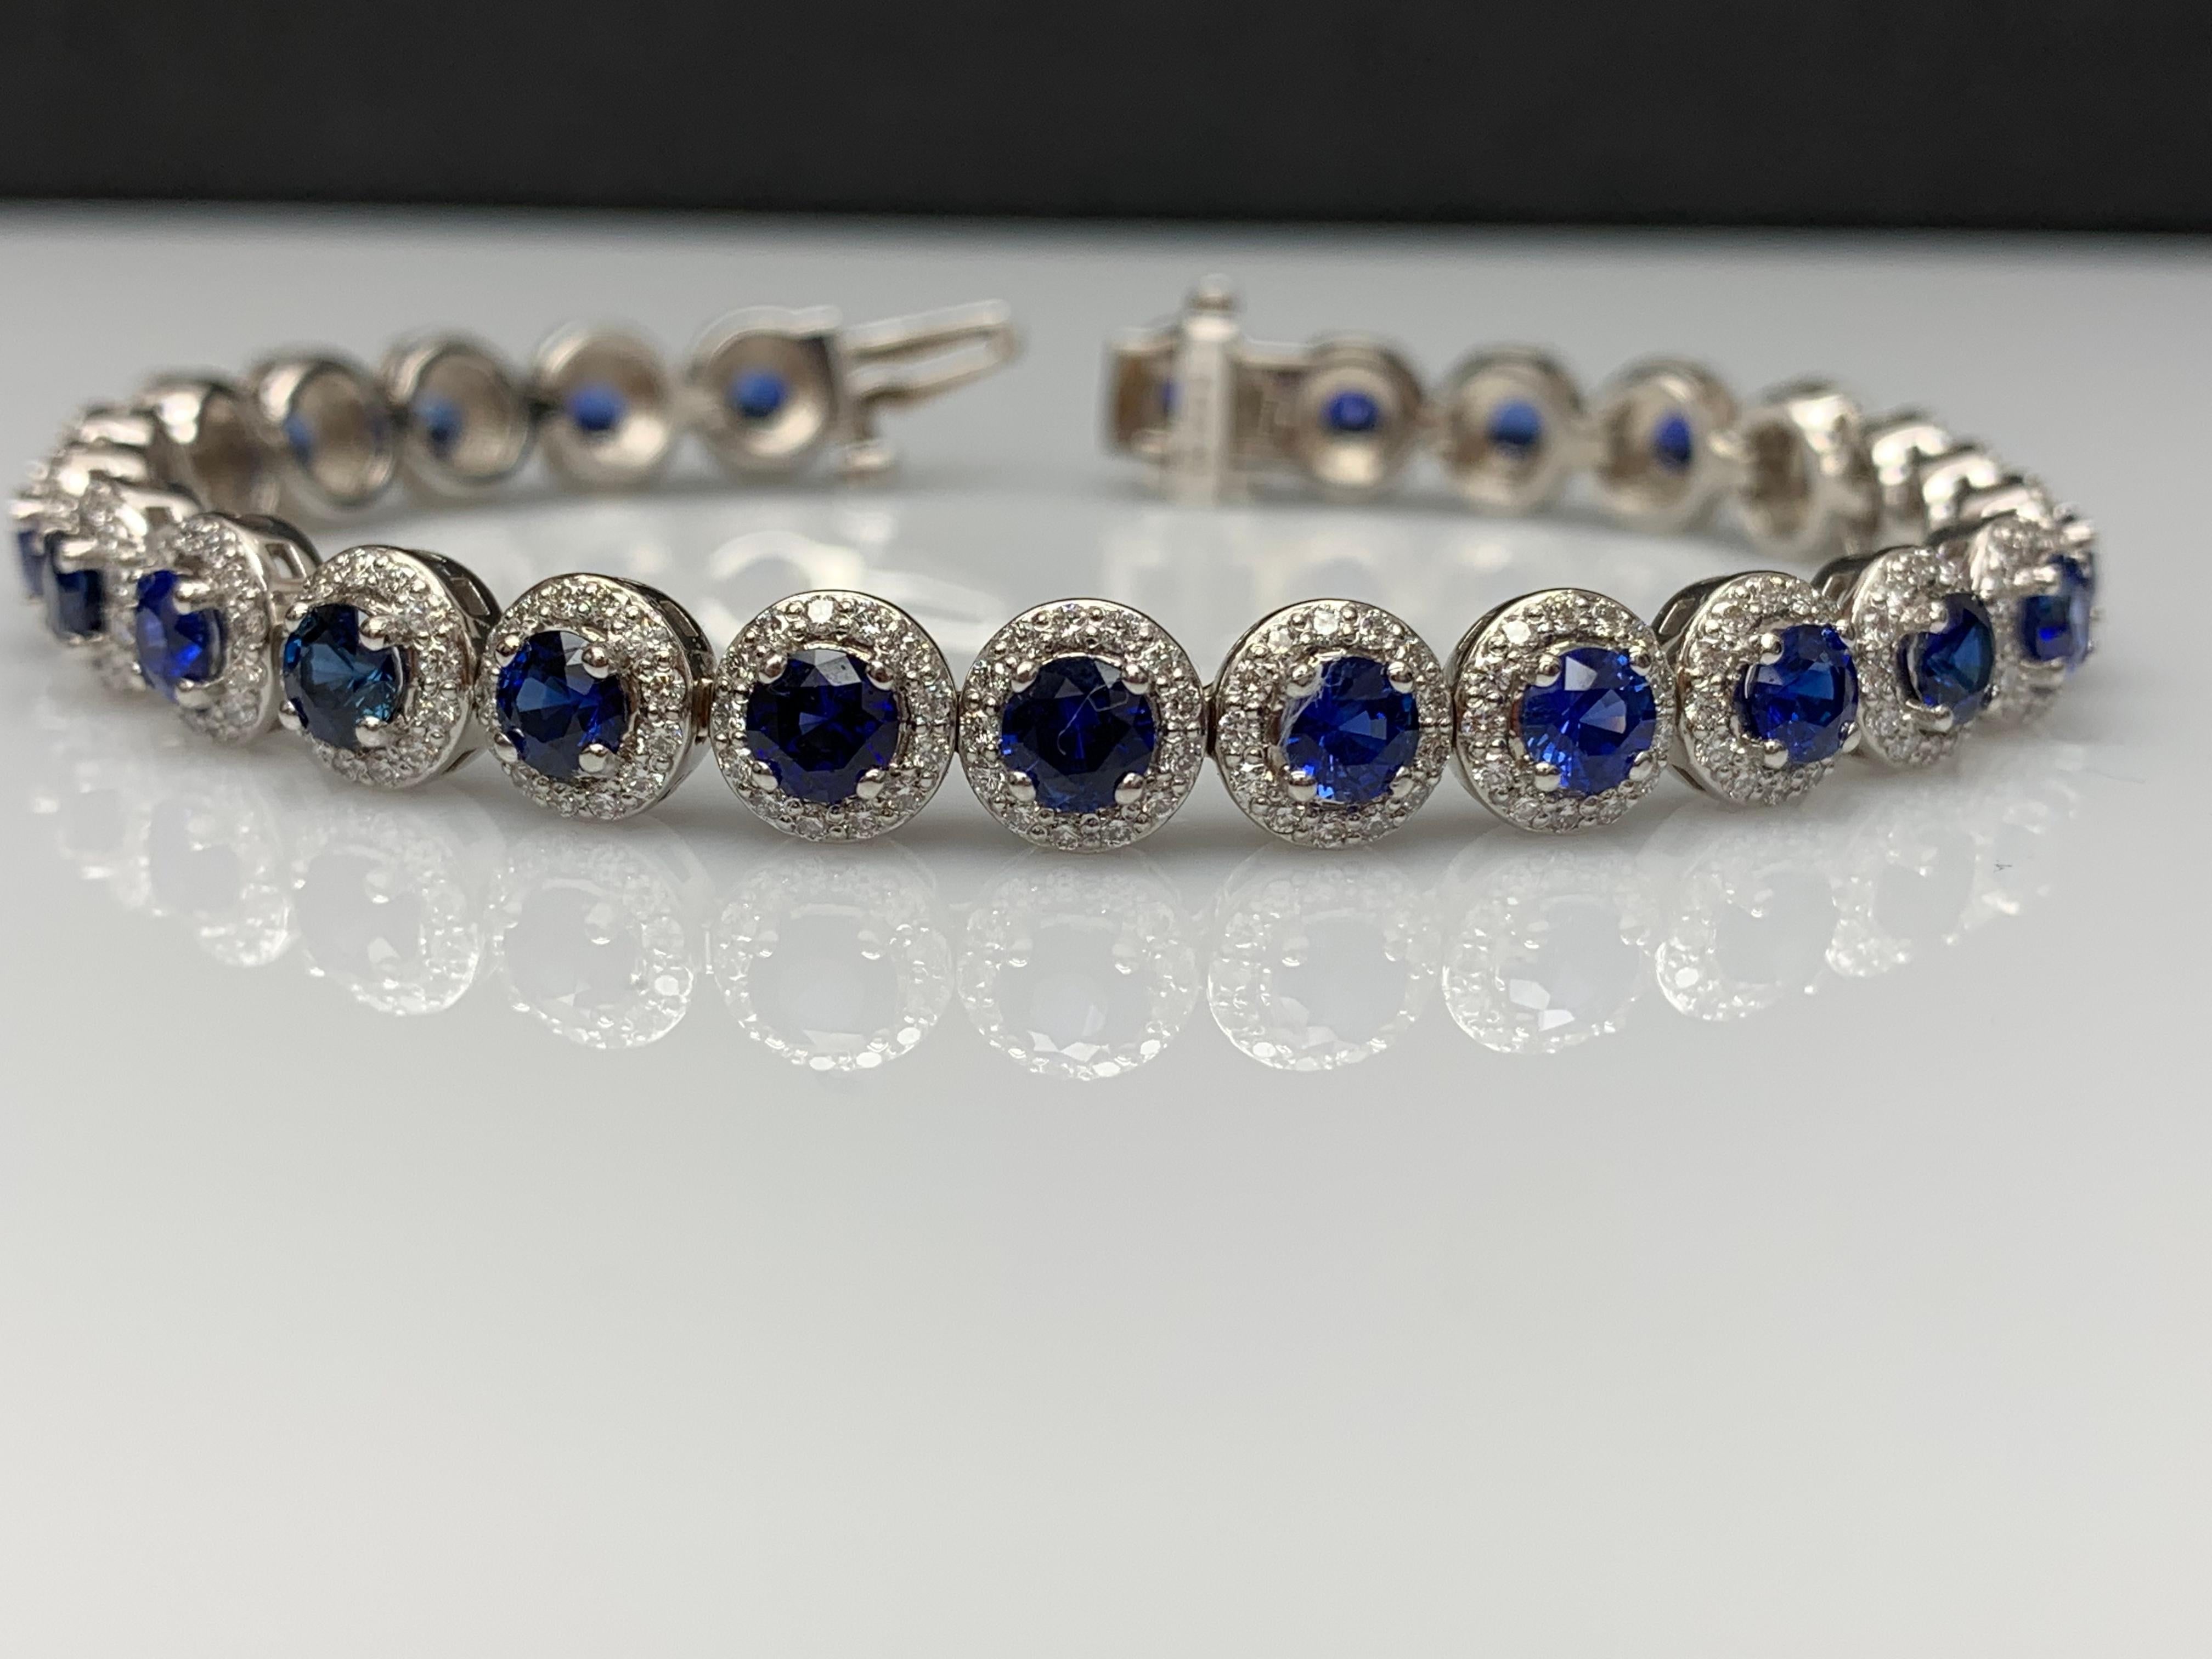 7.47 Carat Blue Sapphire and Diamond Halo Tennis Bracelet in 14k White Gold For Sale 4